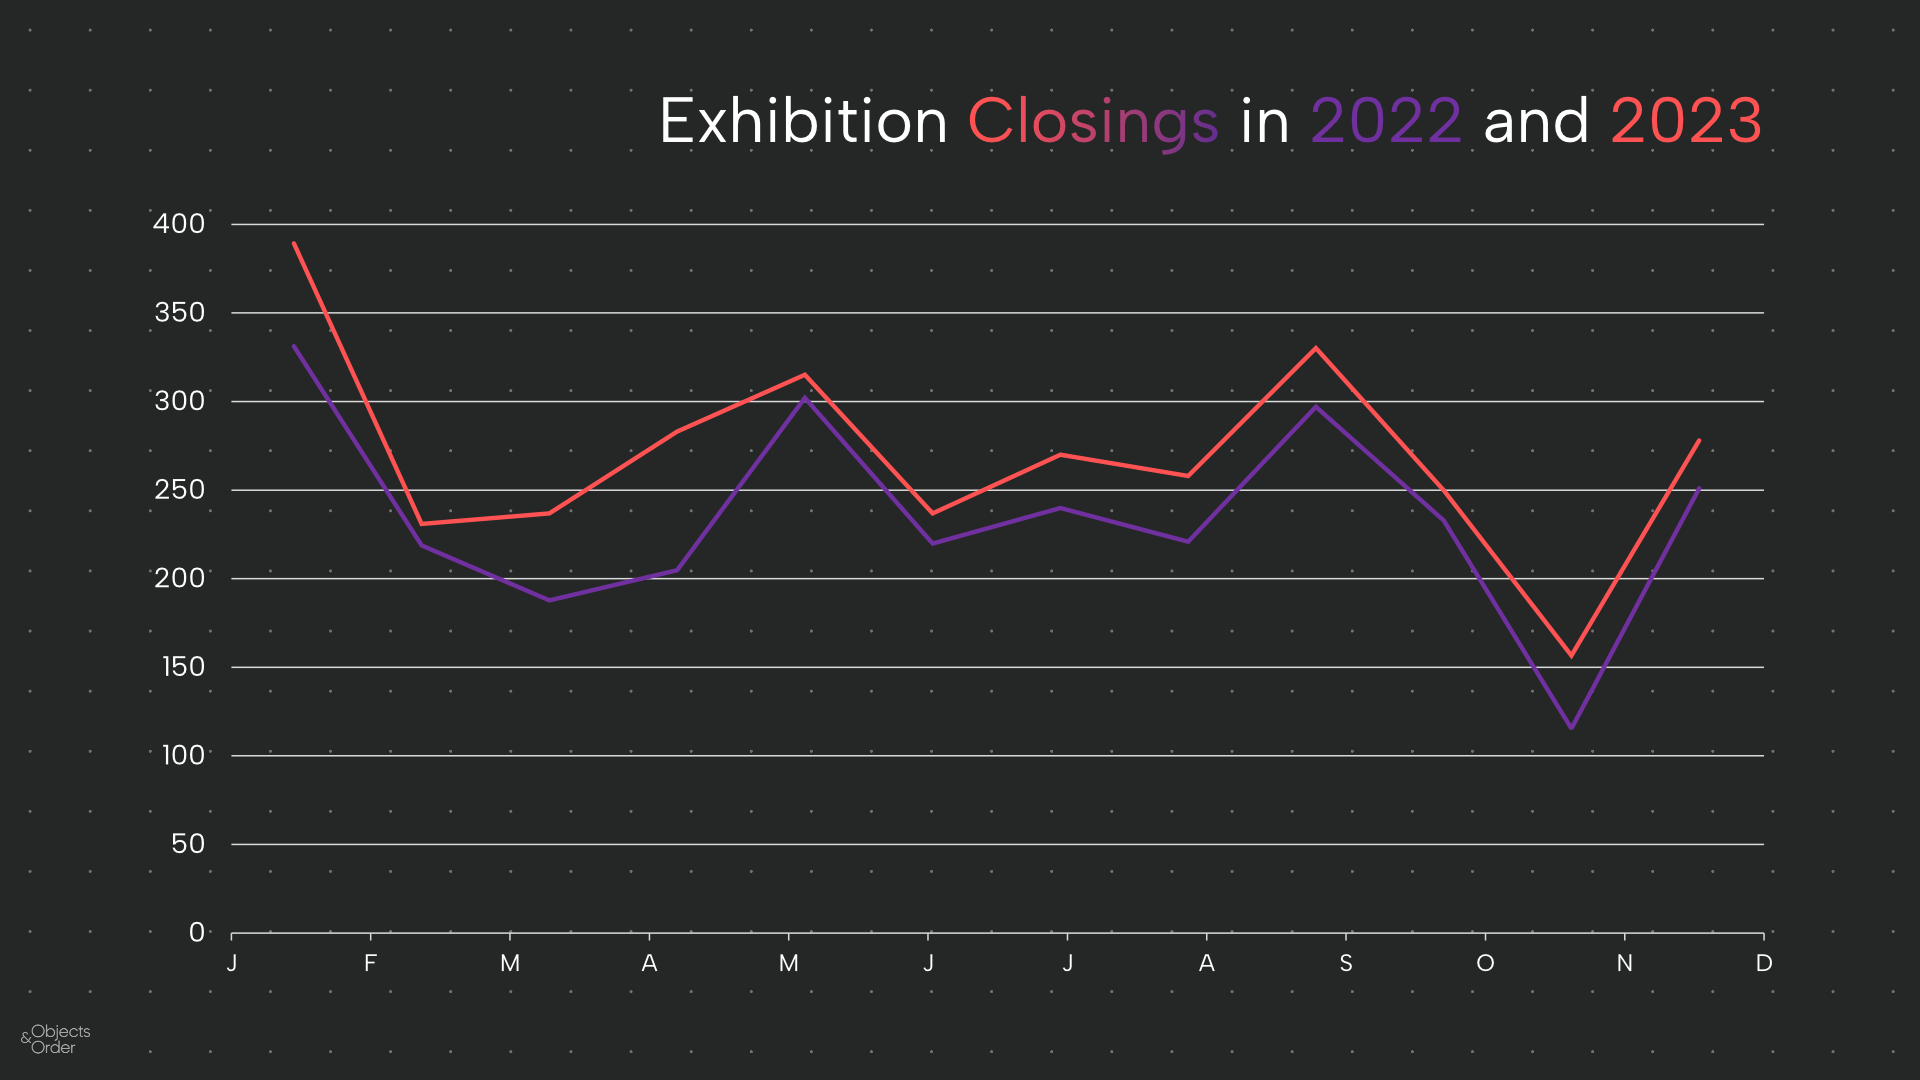 Exhibition Closings in 2022 and 2023